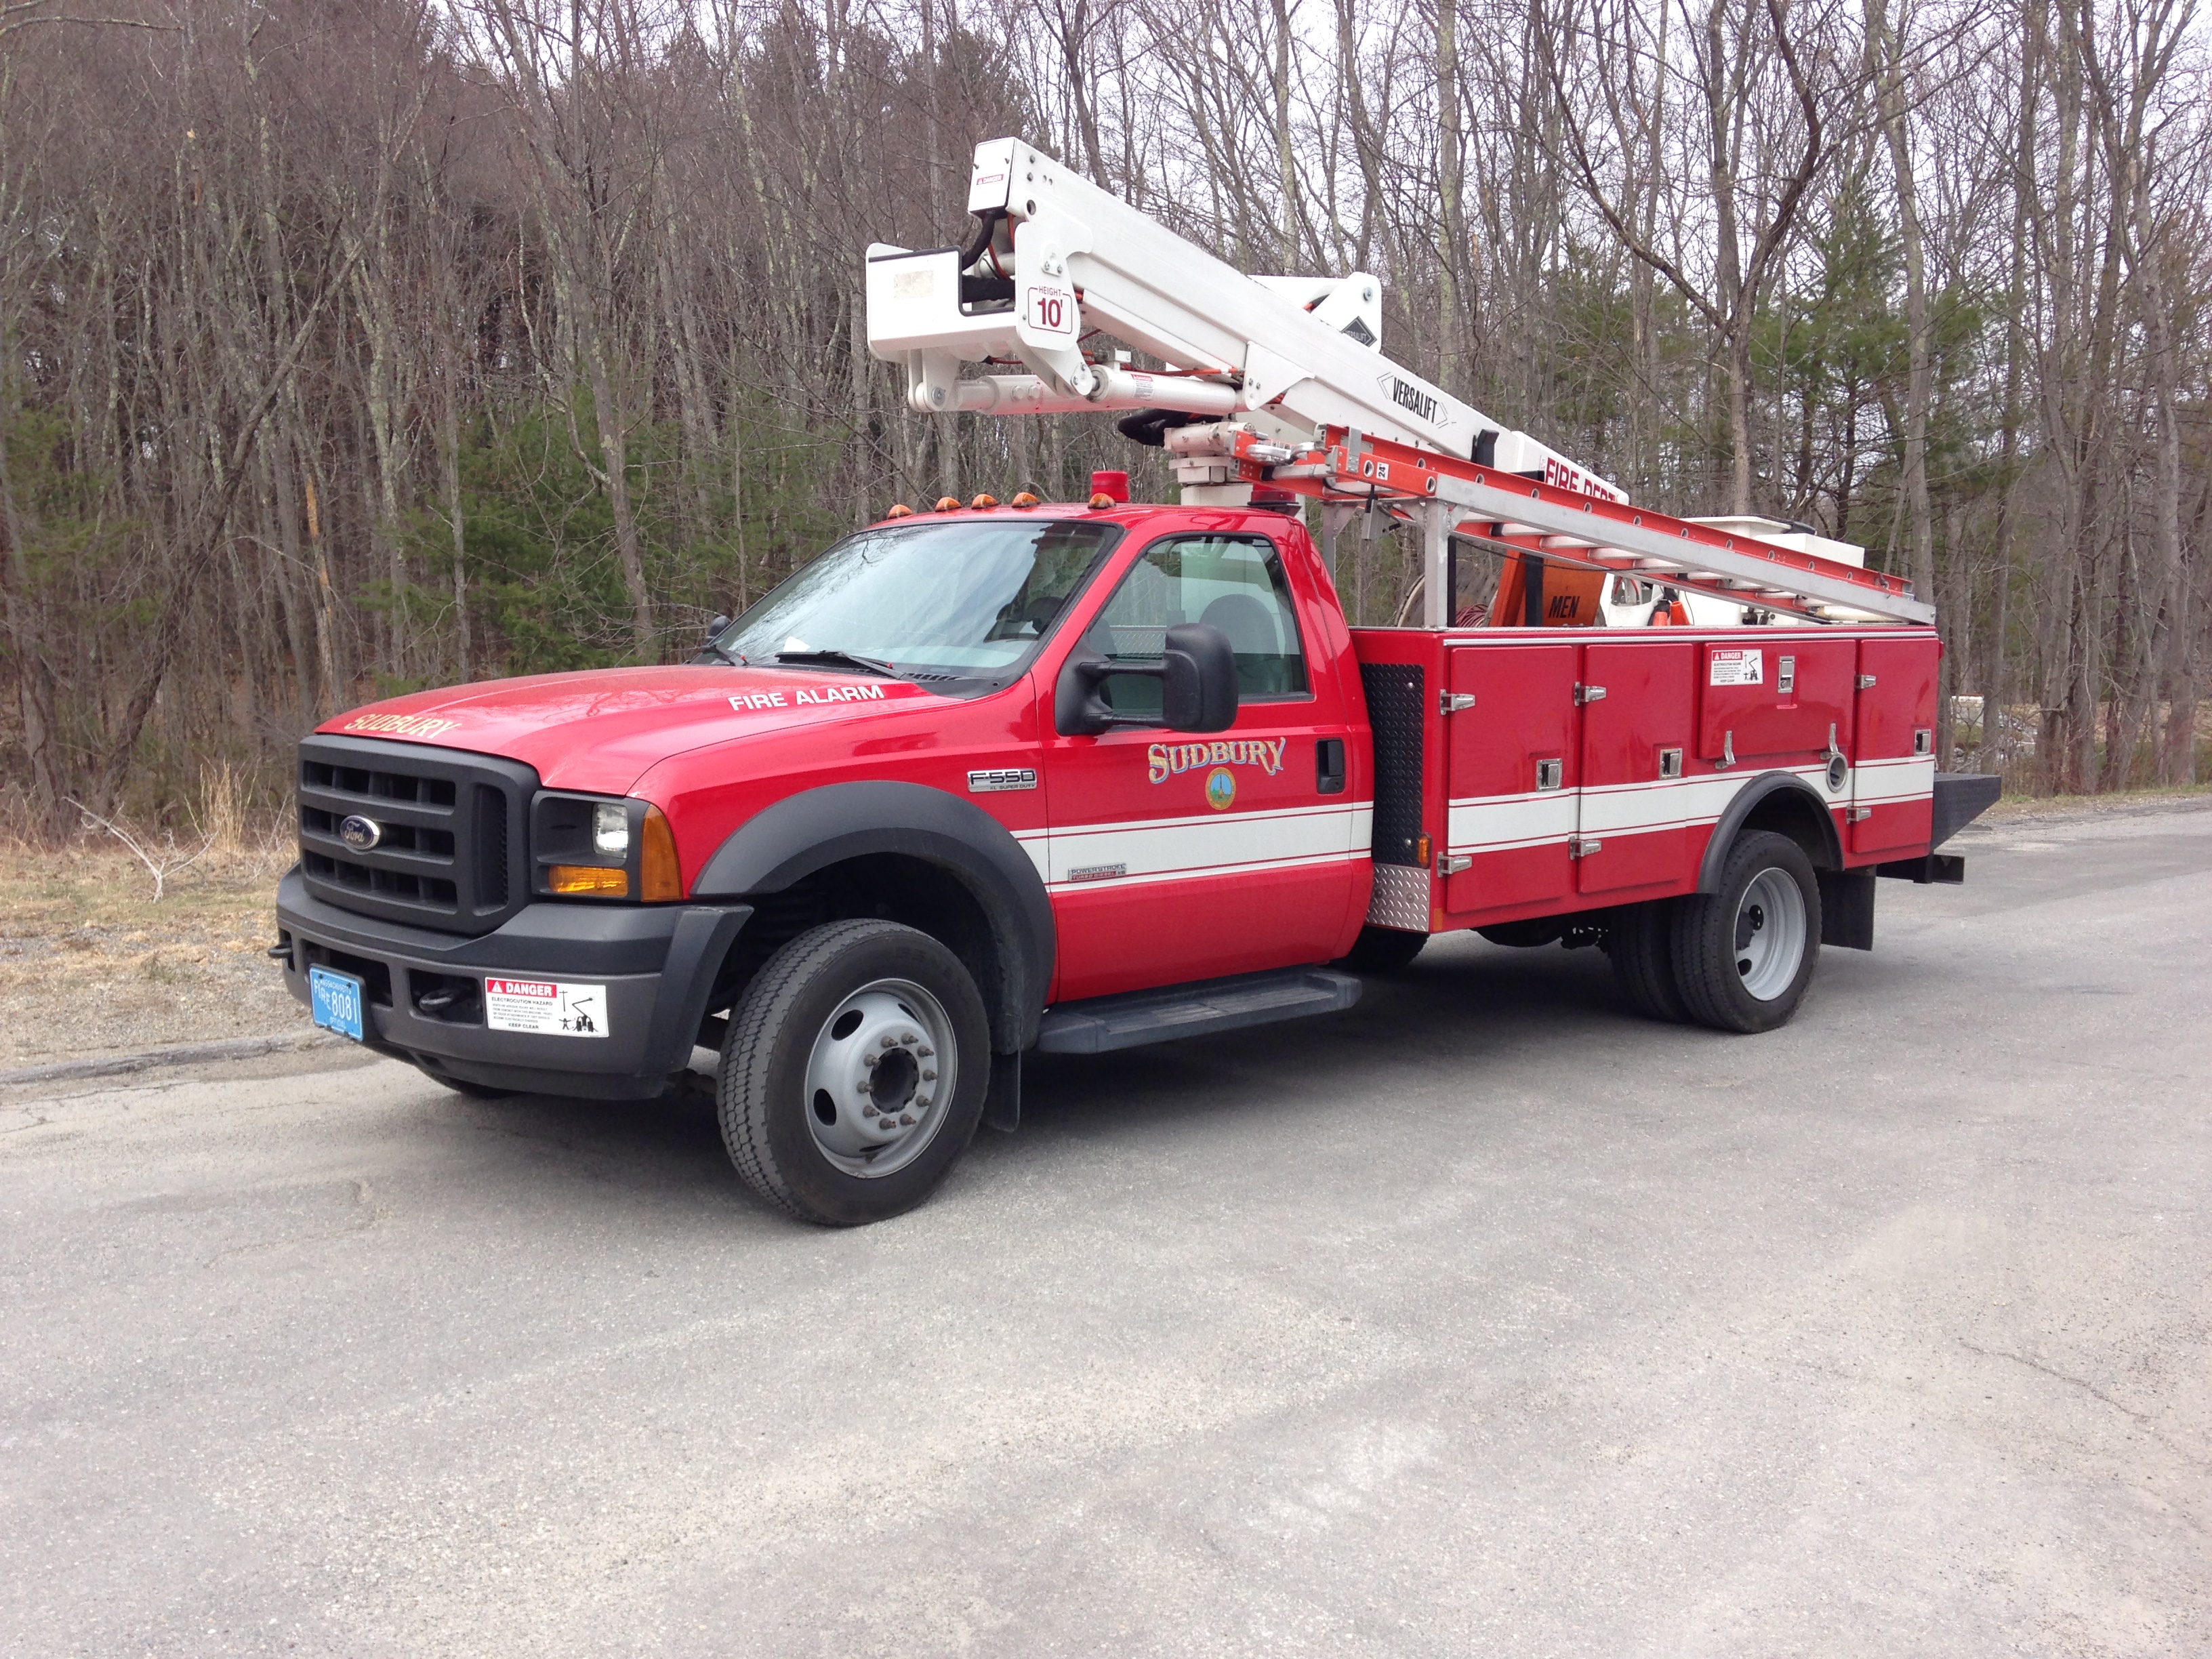 2006 Ford Fire Alarm Truck